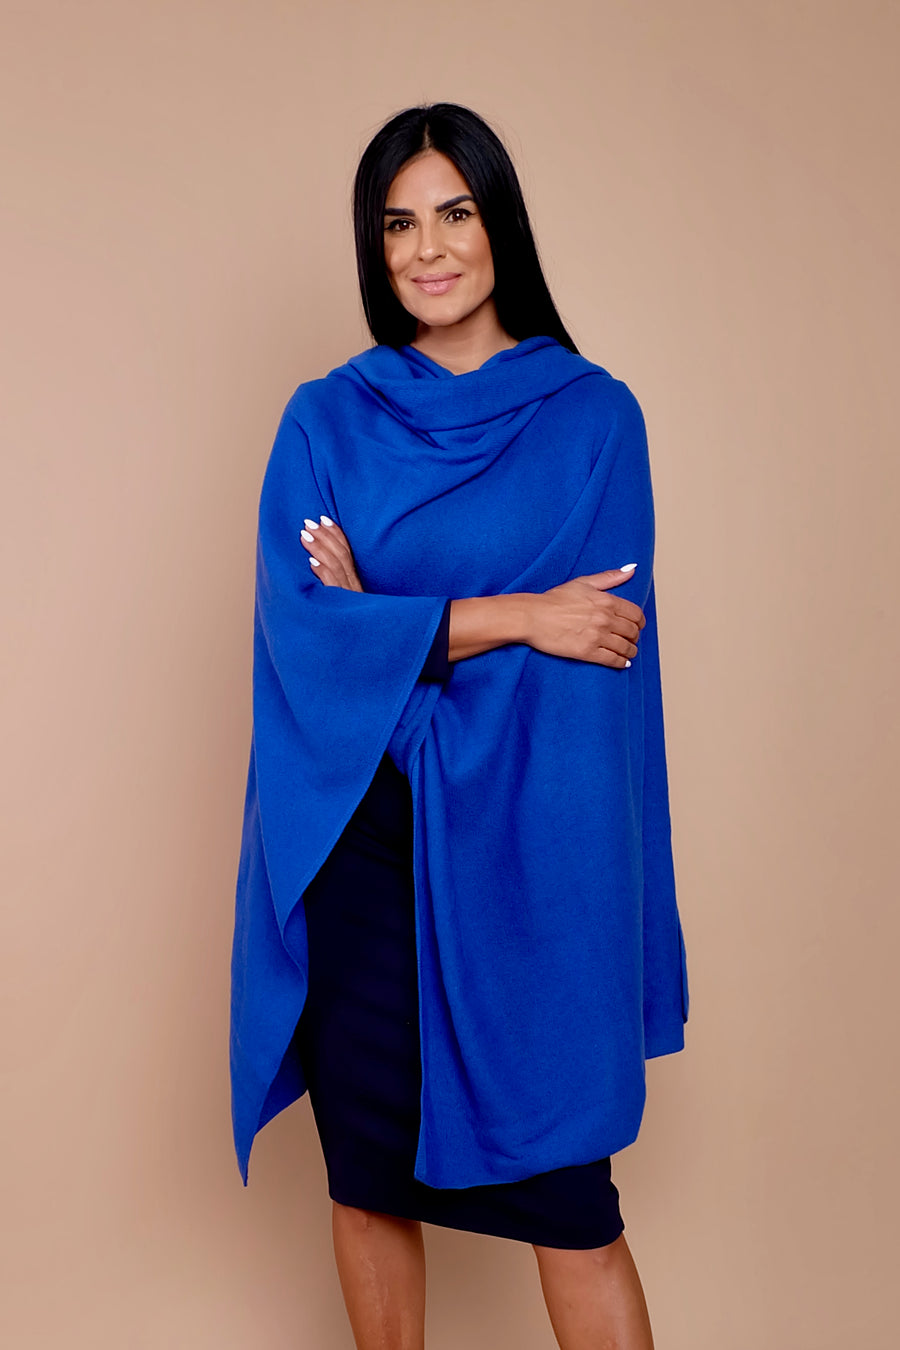 woman wearing black work dress with blue scarf